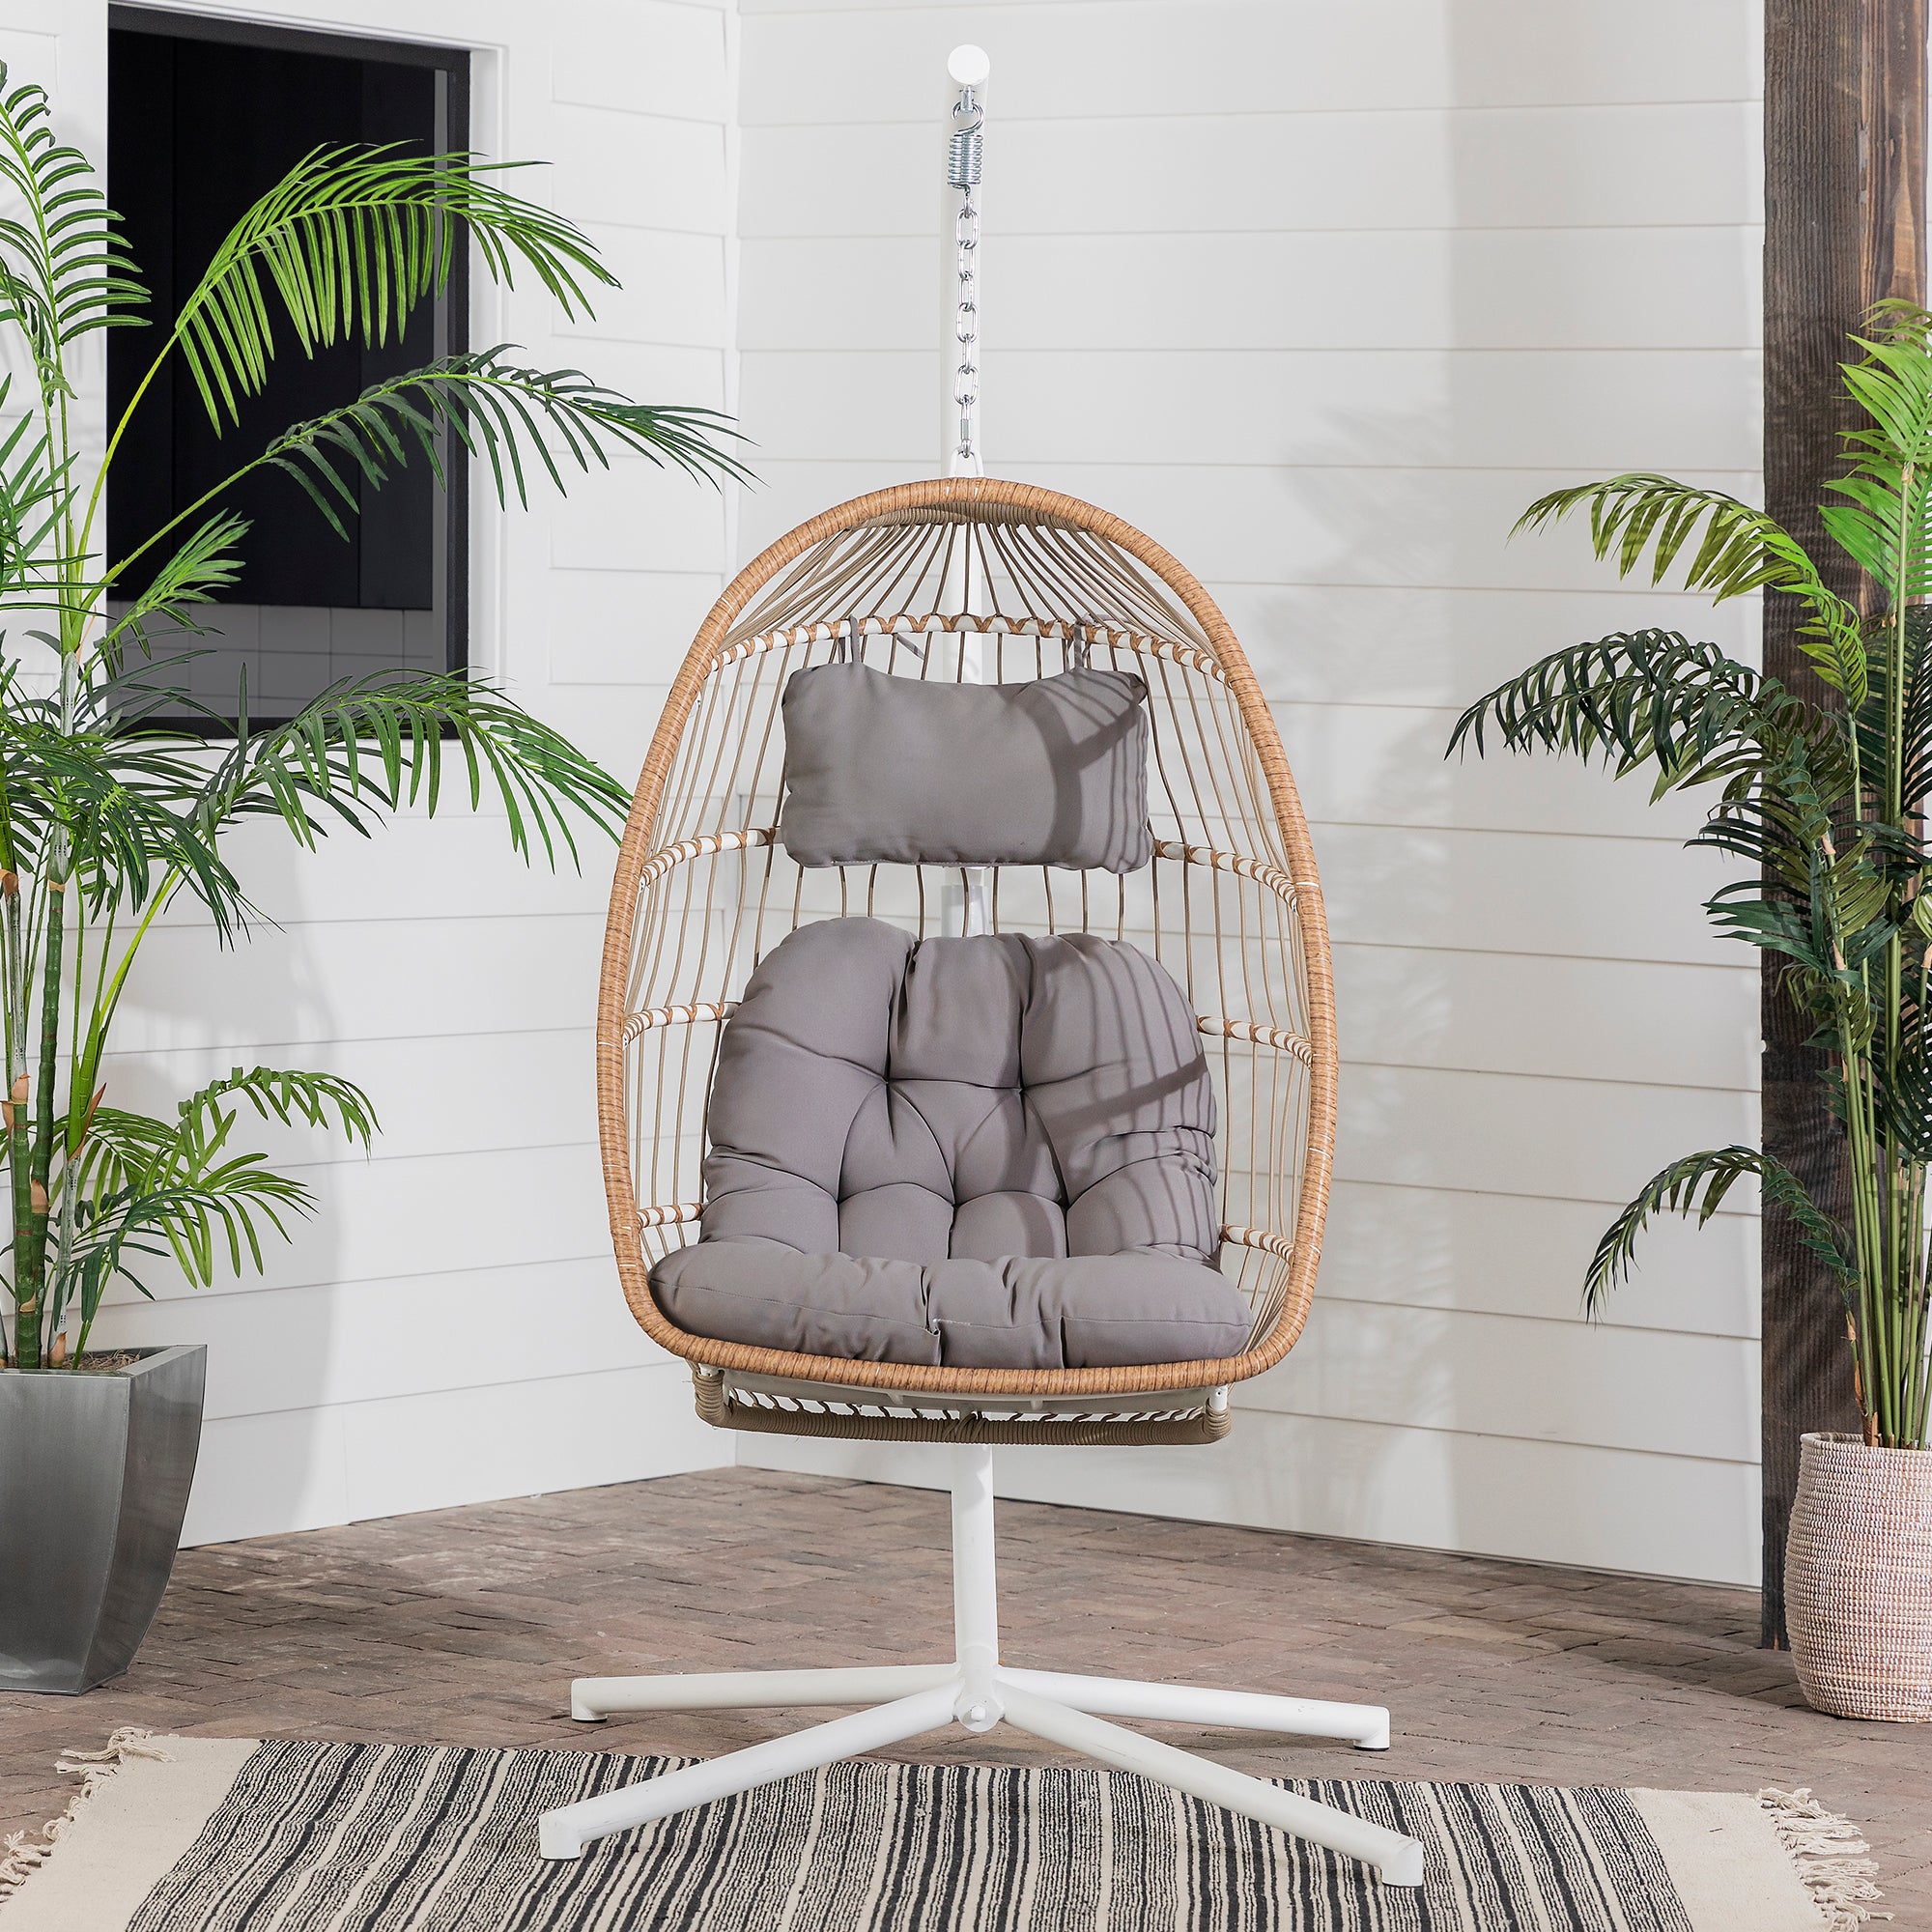 Hammock Swing Chair with Stand - East Shore Modern Home Furnishings